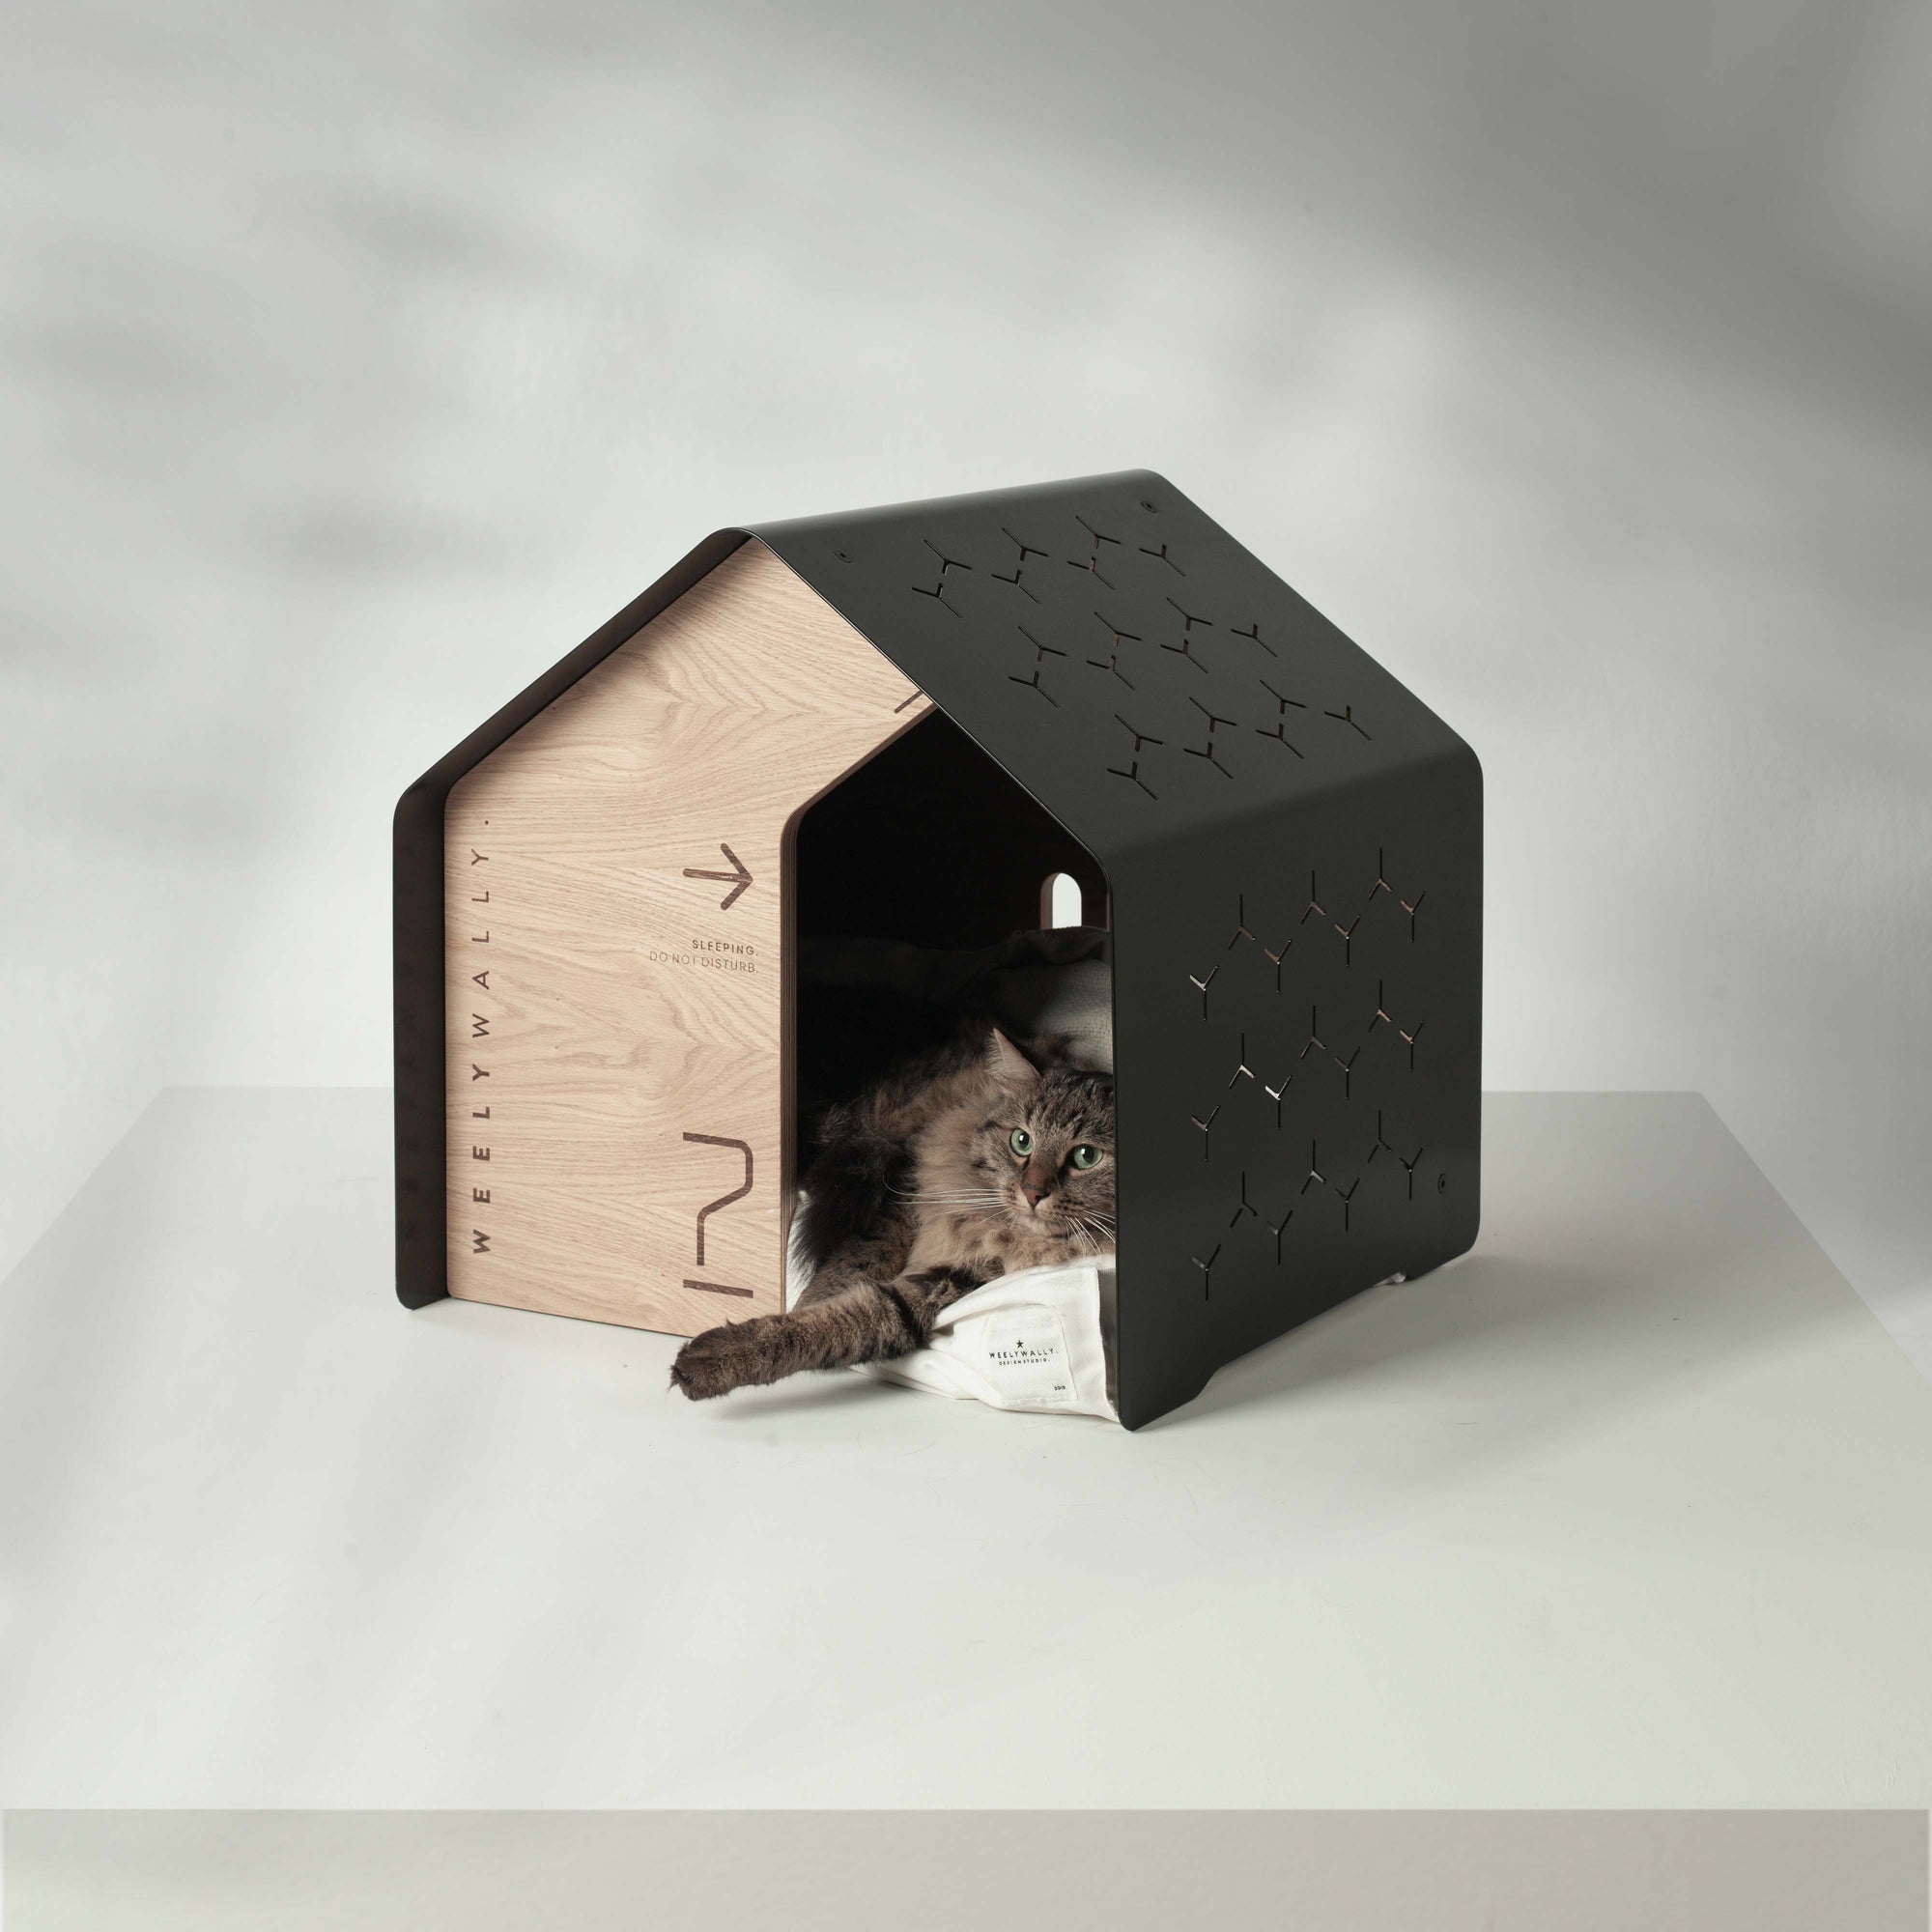 Modern cat house bed that will make your home look even more stylish